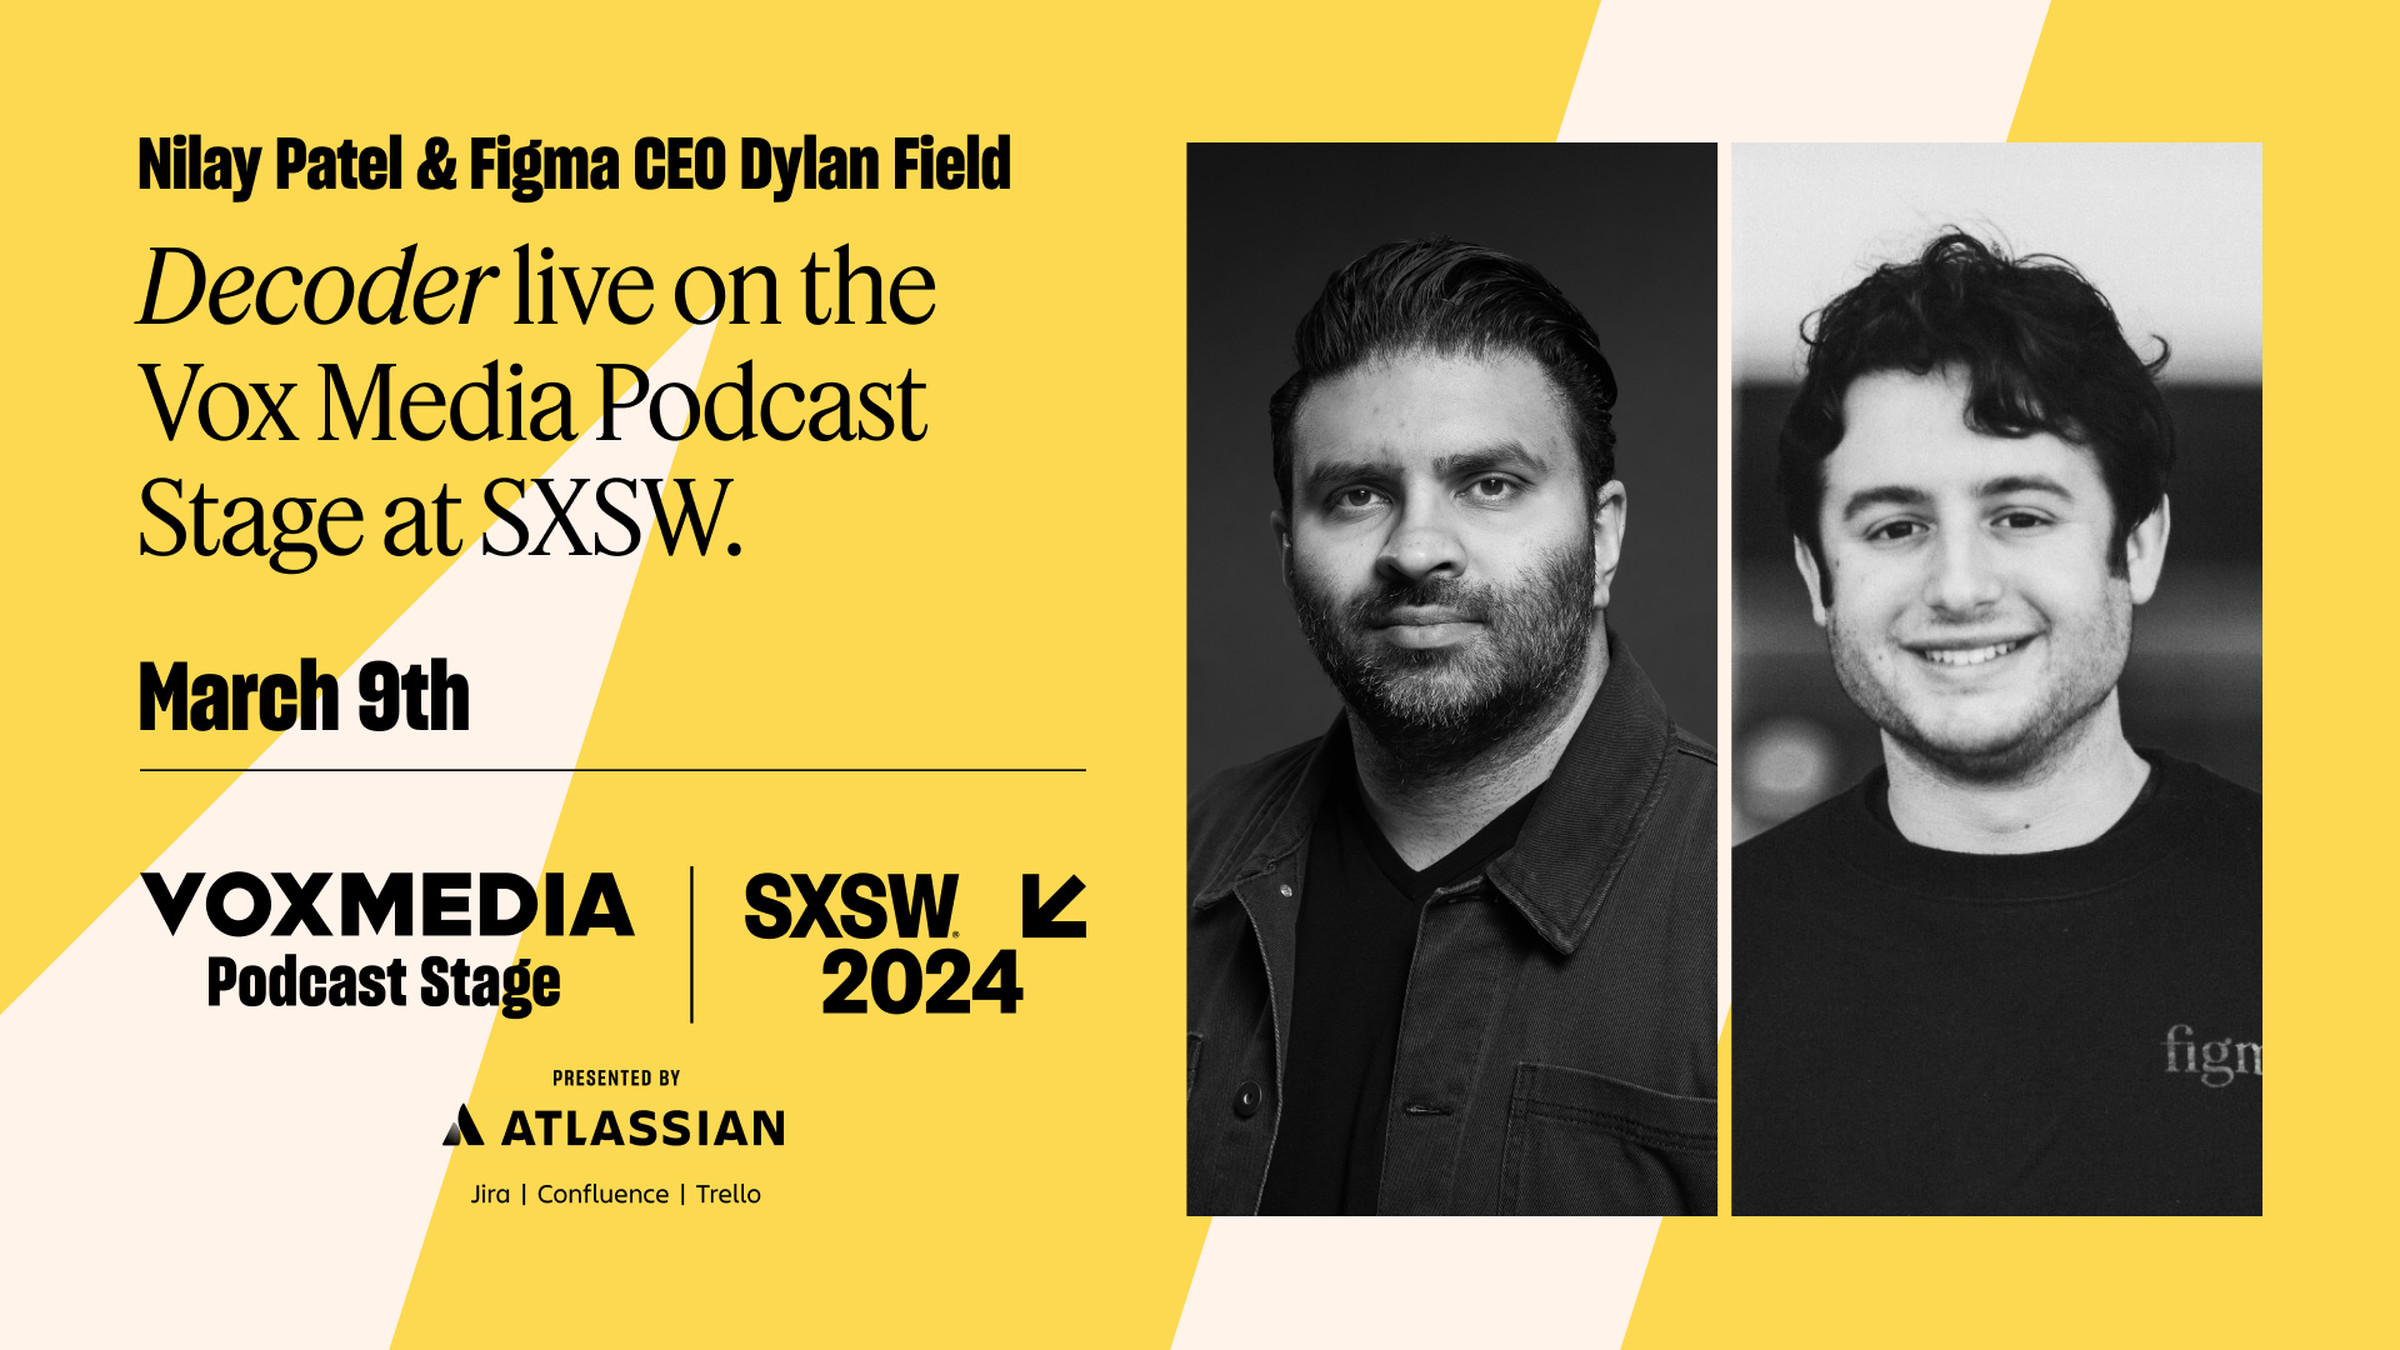 A promo image showing Dylan Field and Nilay Patel with information about their SXSW Decoder interview on March 9th.